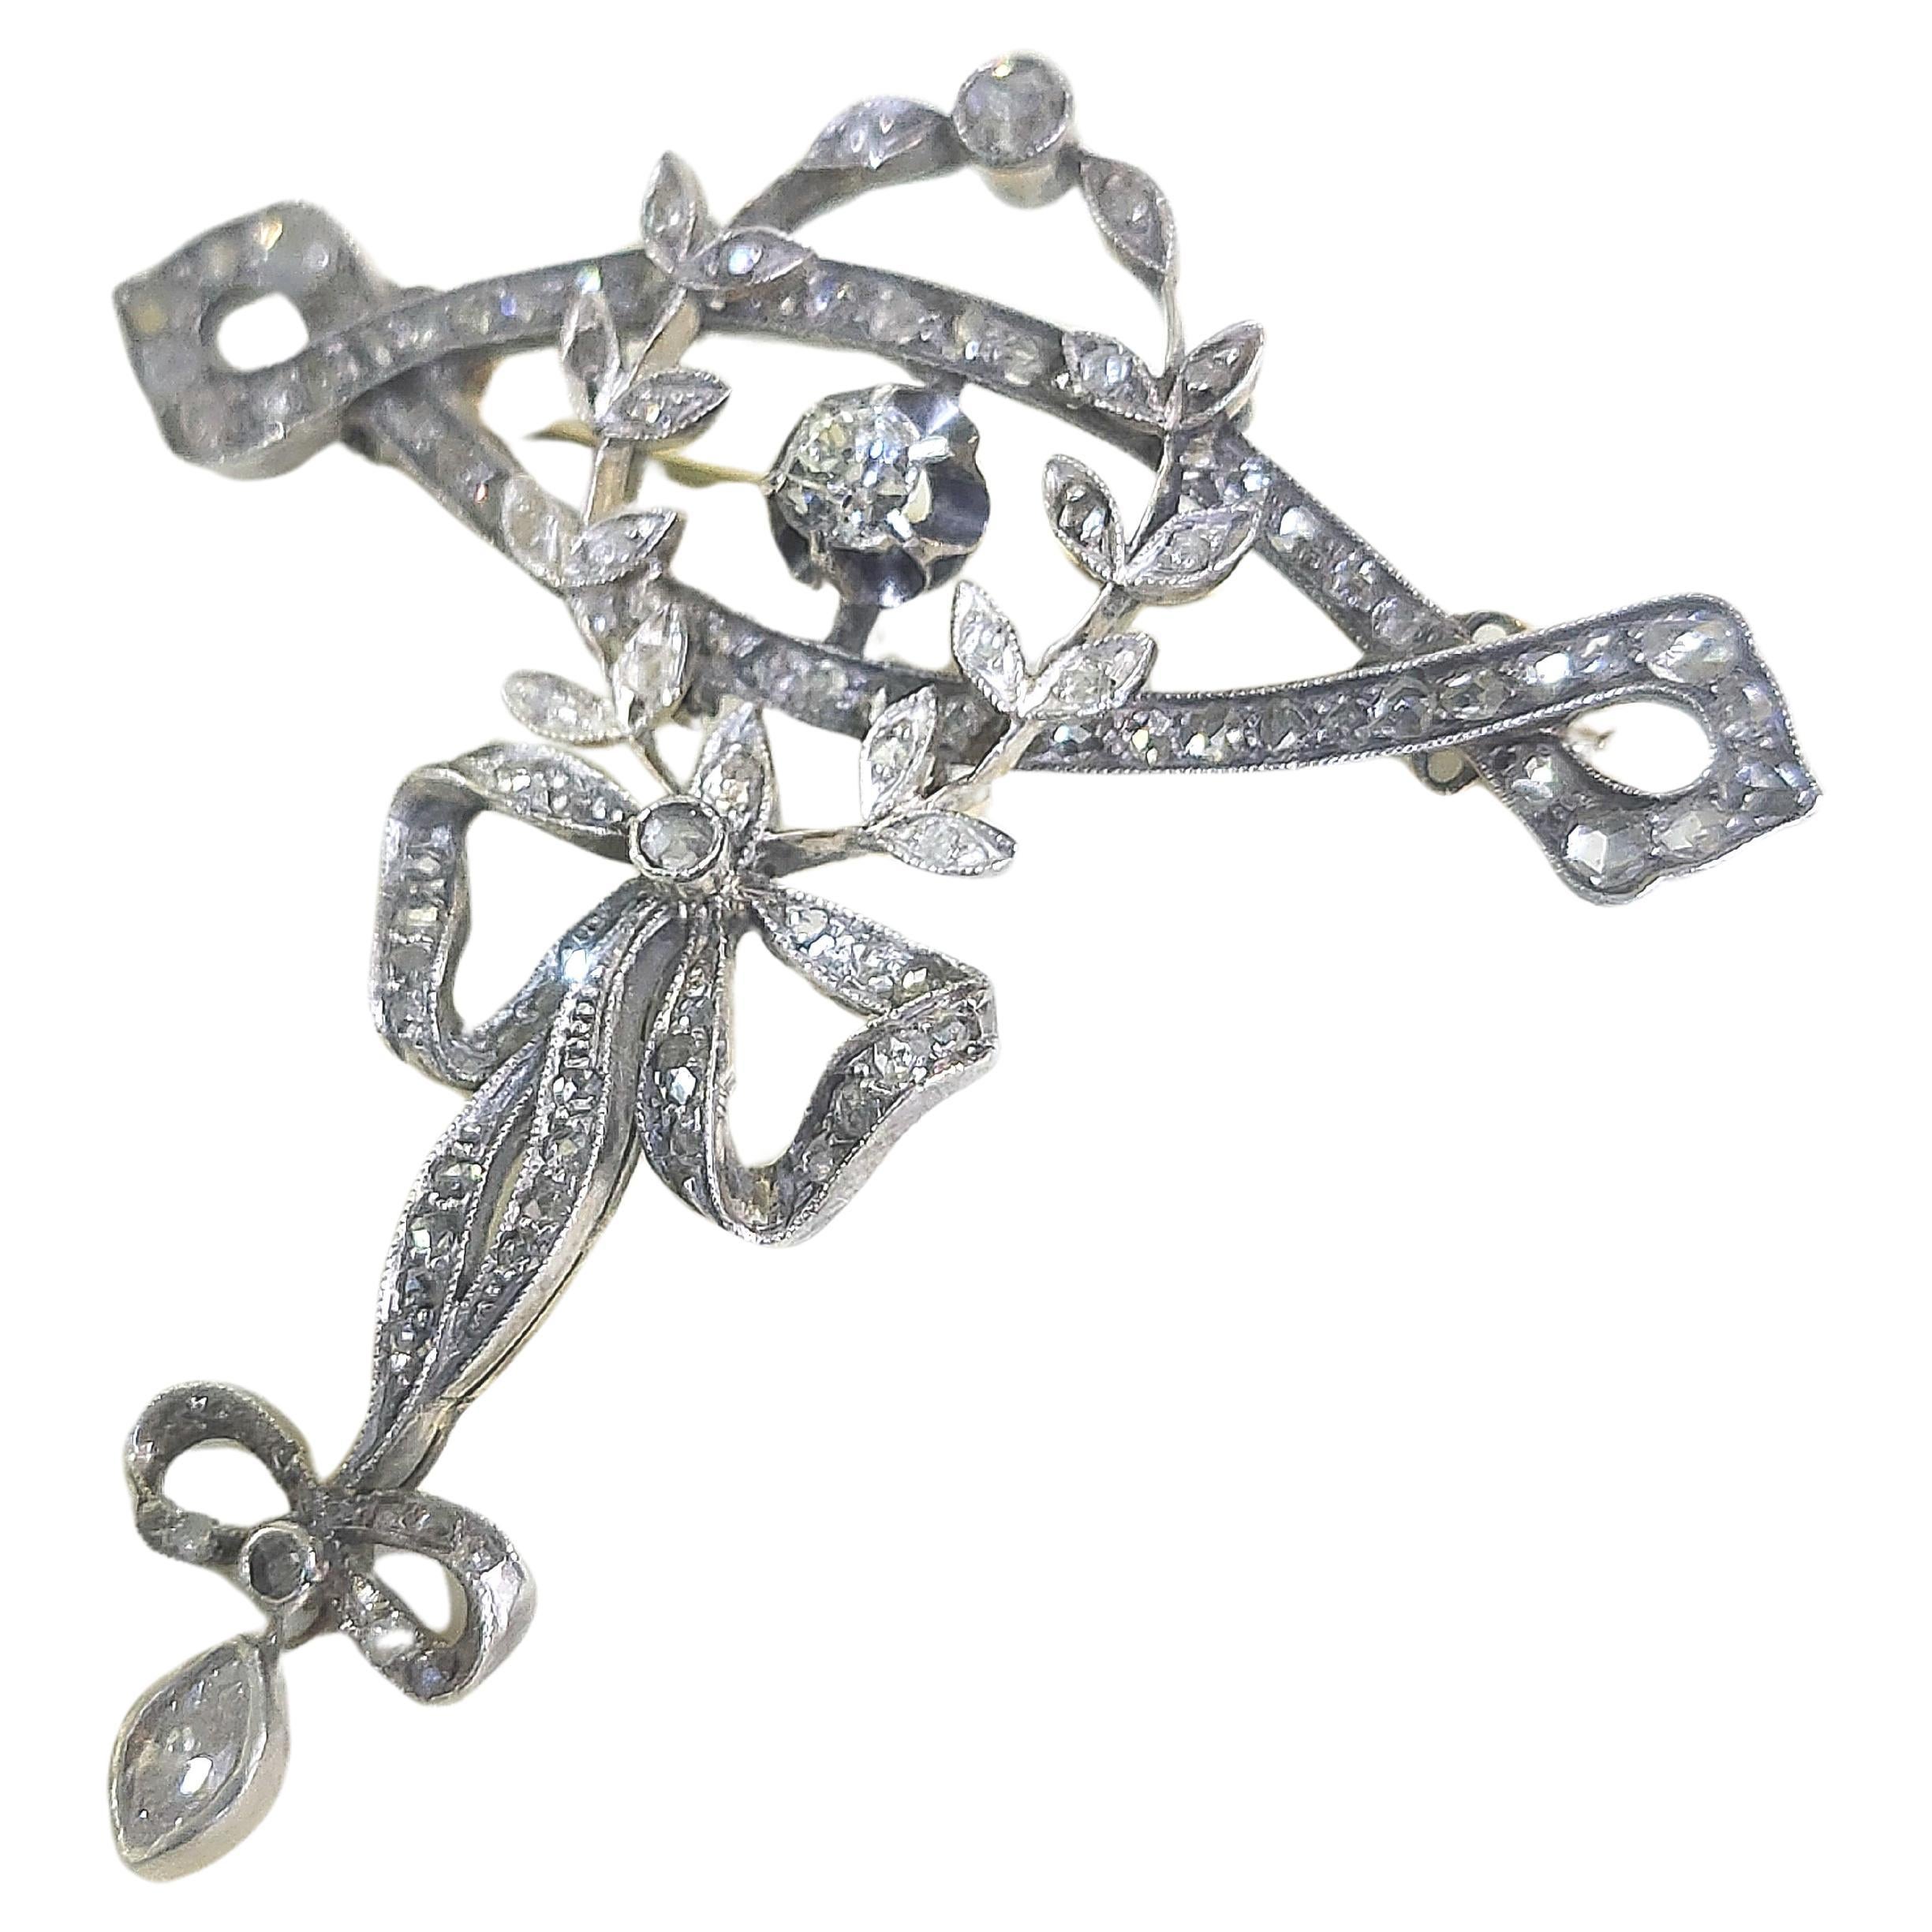 Victorian era 1850s brooch in open work designed with a ribbon with old mine cut diamonds and rose cut diamonds in gold toped with silver in fine workmanship total brooch lenght 4.5cm and estimate diamond weight 1 carat